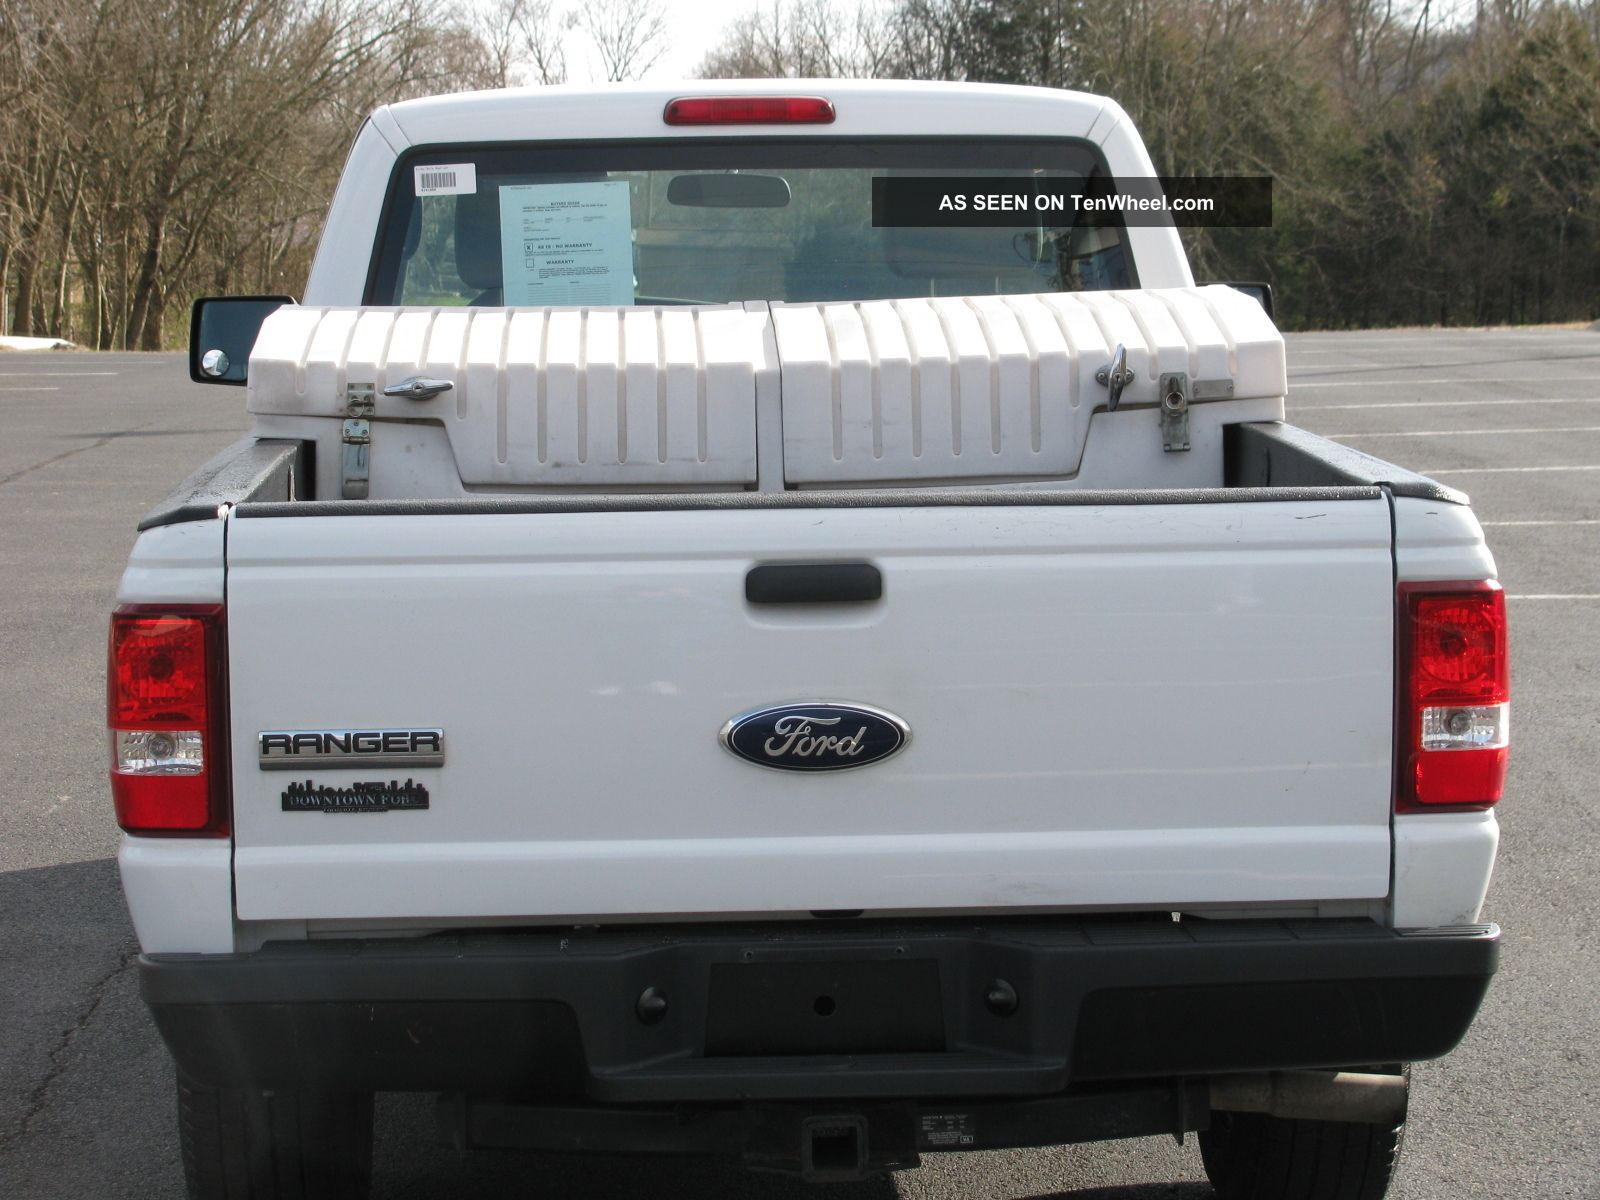 2010 Ford ranger tool boxes #10